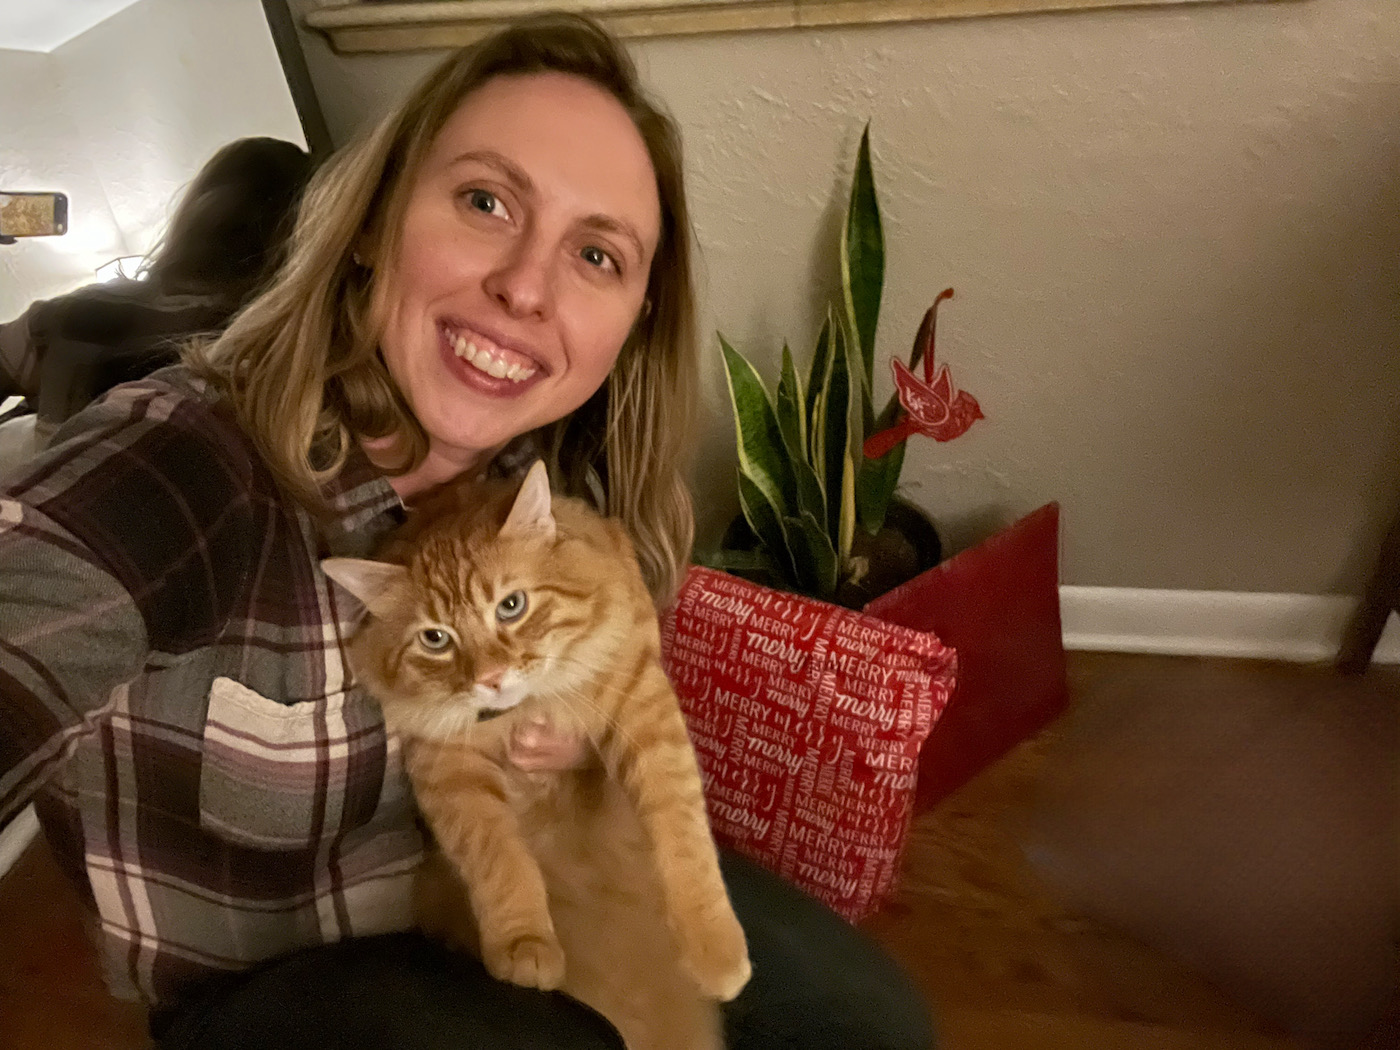 Jessi Prinner is the owner of the popular cat website - All About Catz